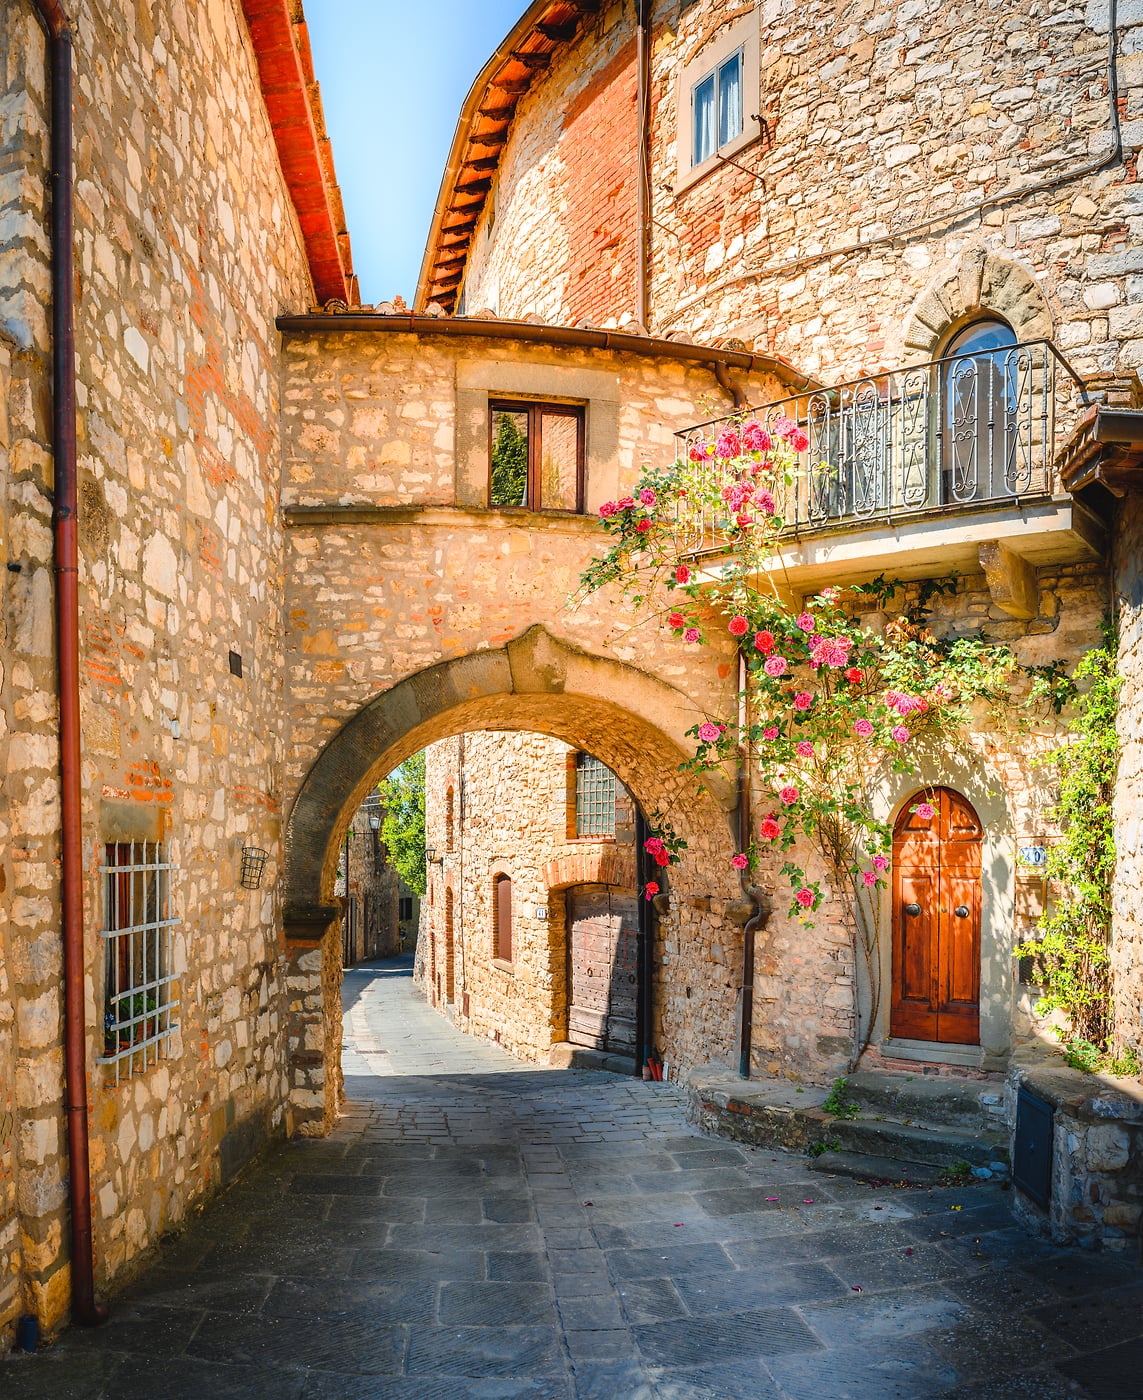 465 megapixels! A very high resolution, large-format VAST photo print of a town street in Italy; art photo created by Justin Katz in Vertine, Gaiole in Chianti, Tuscany, Italy